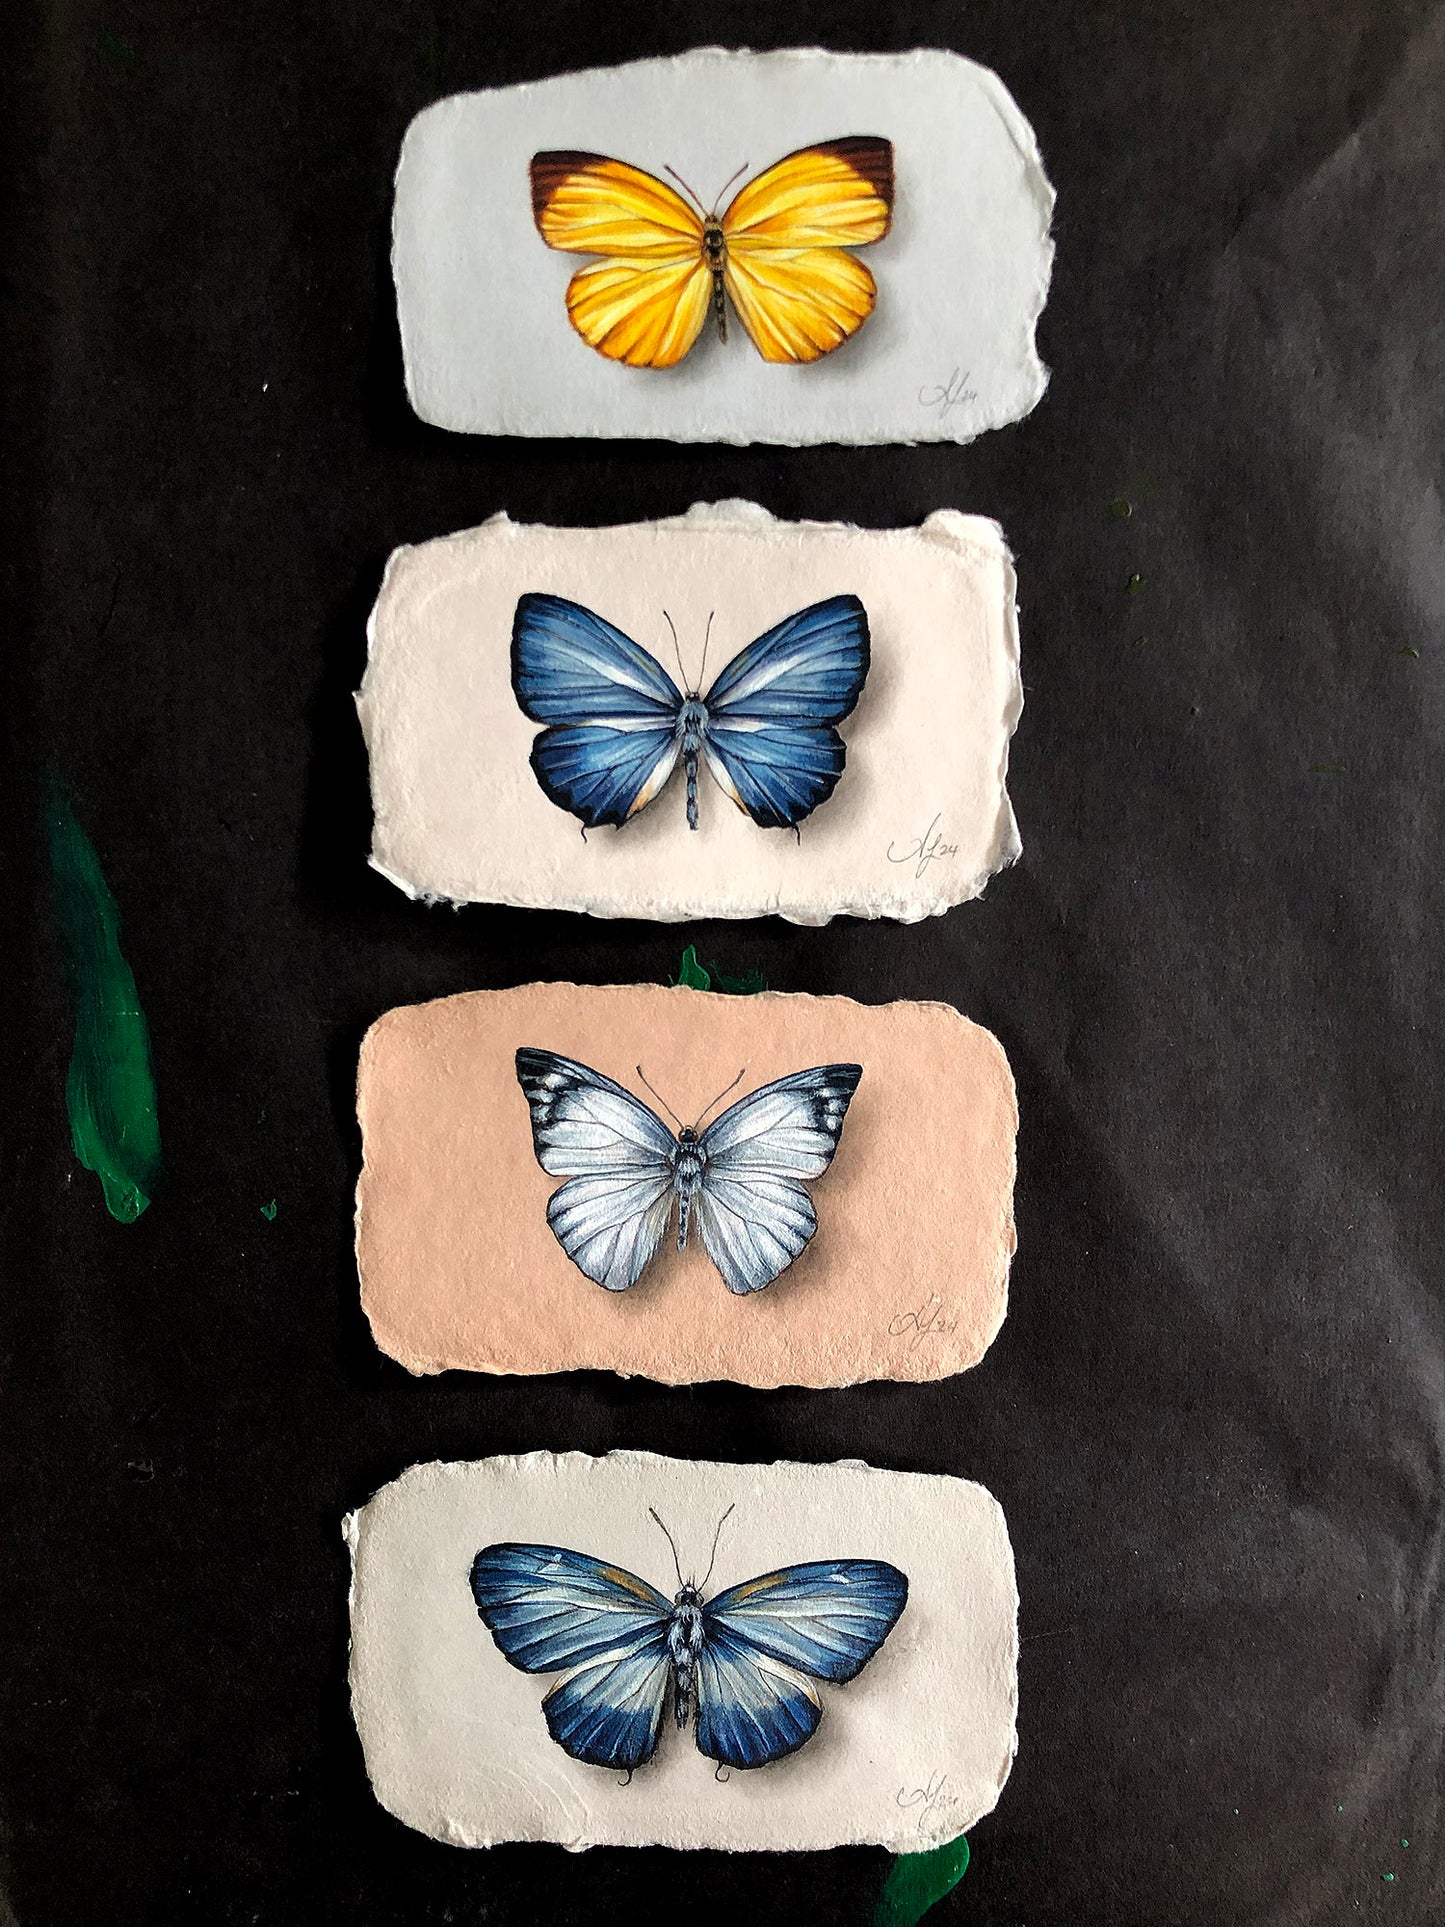 Butterfly on Handmade Paper #8 - 4.5 x 2.5"